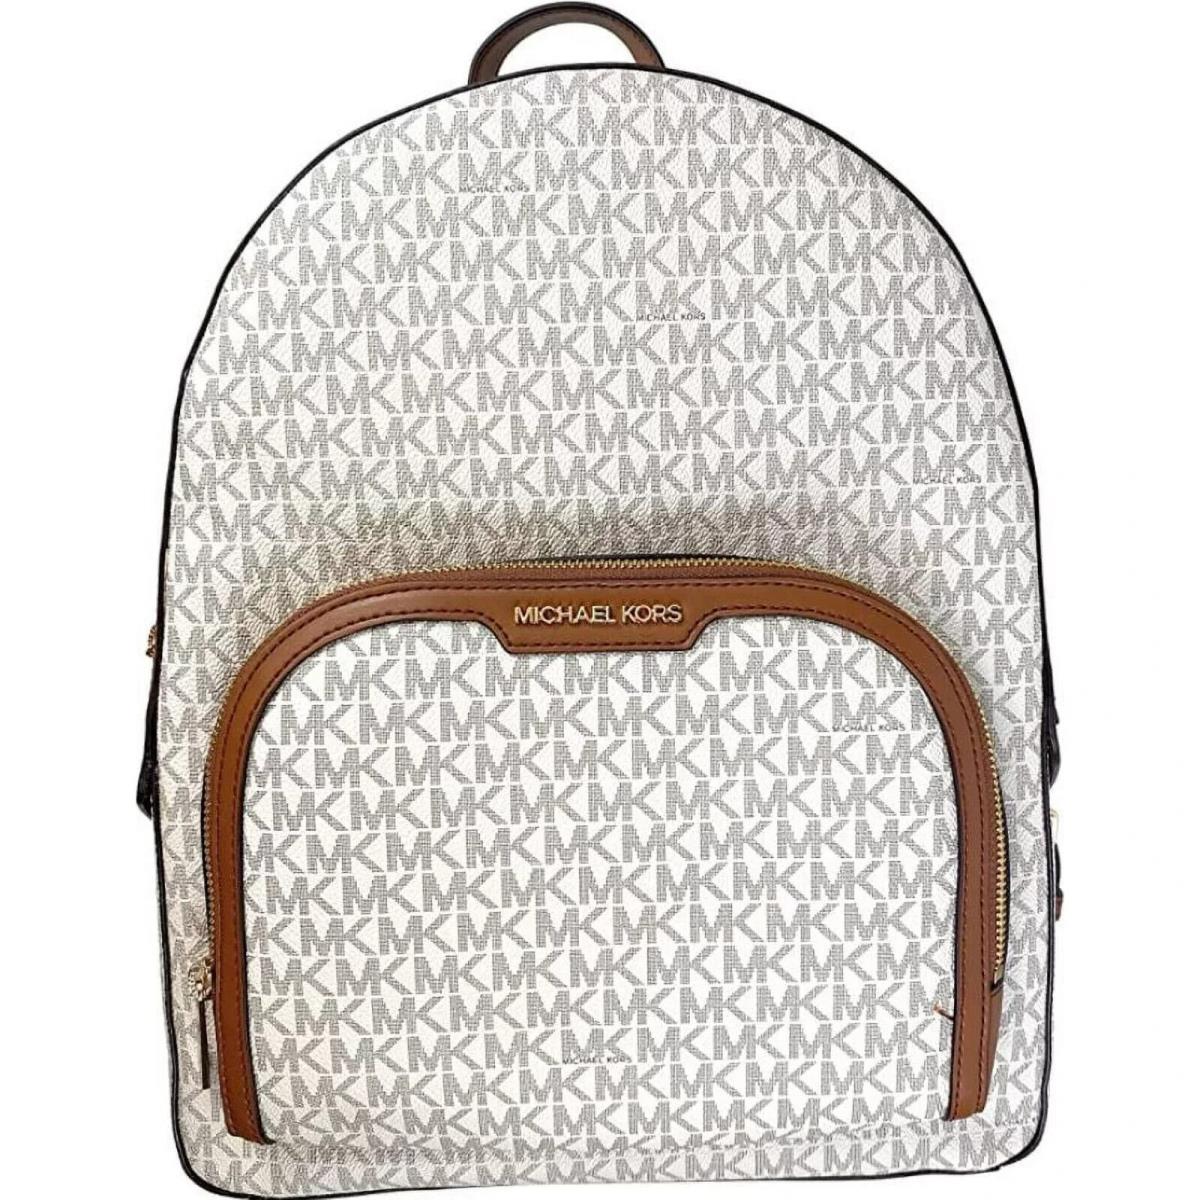 Michael Kors Jaycee Large Logo Backpack Vanilla with Dust Bag Included - Exterior: